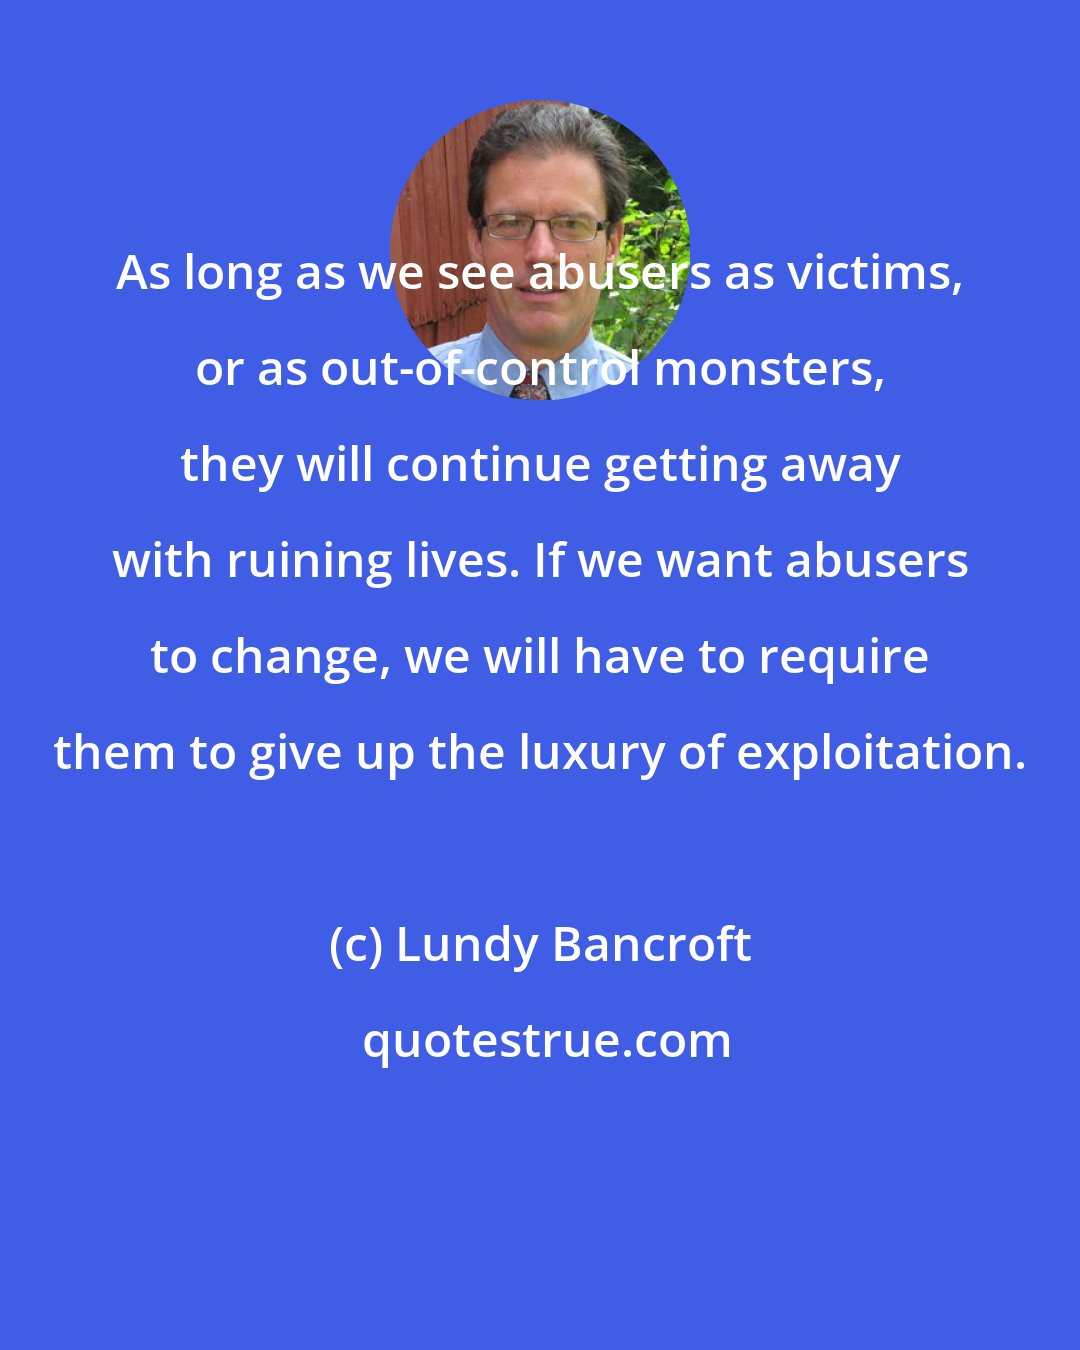 Lundy Bancroft: As long as we see abusers as victims, or as out-of-control monsters, they will continue getting away with ruining lives. If we want abusers to change, we will have to require them to give up the luxury of exploitation.